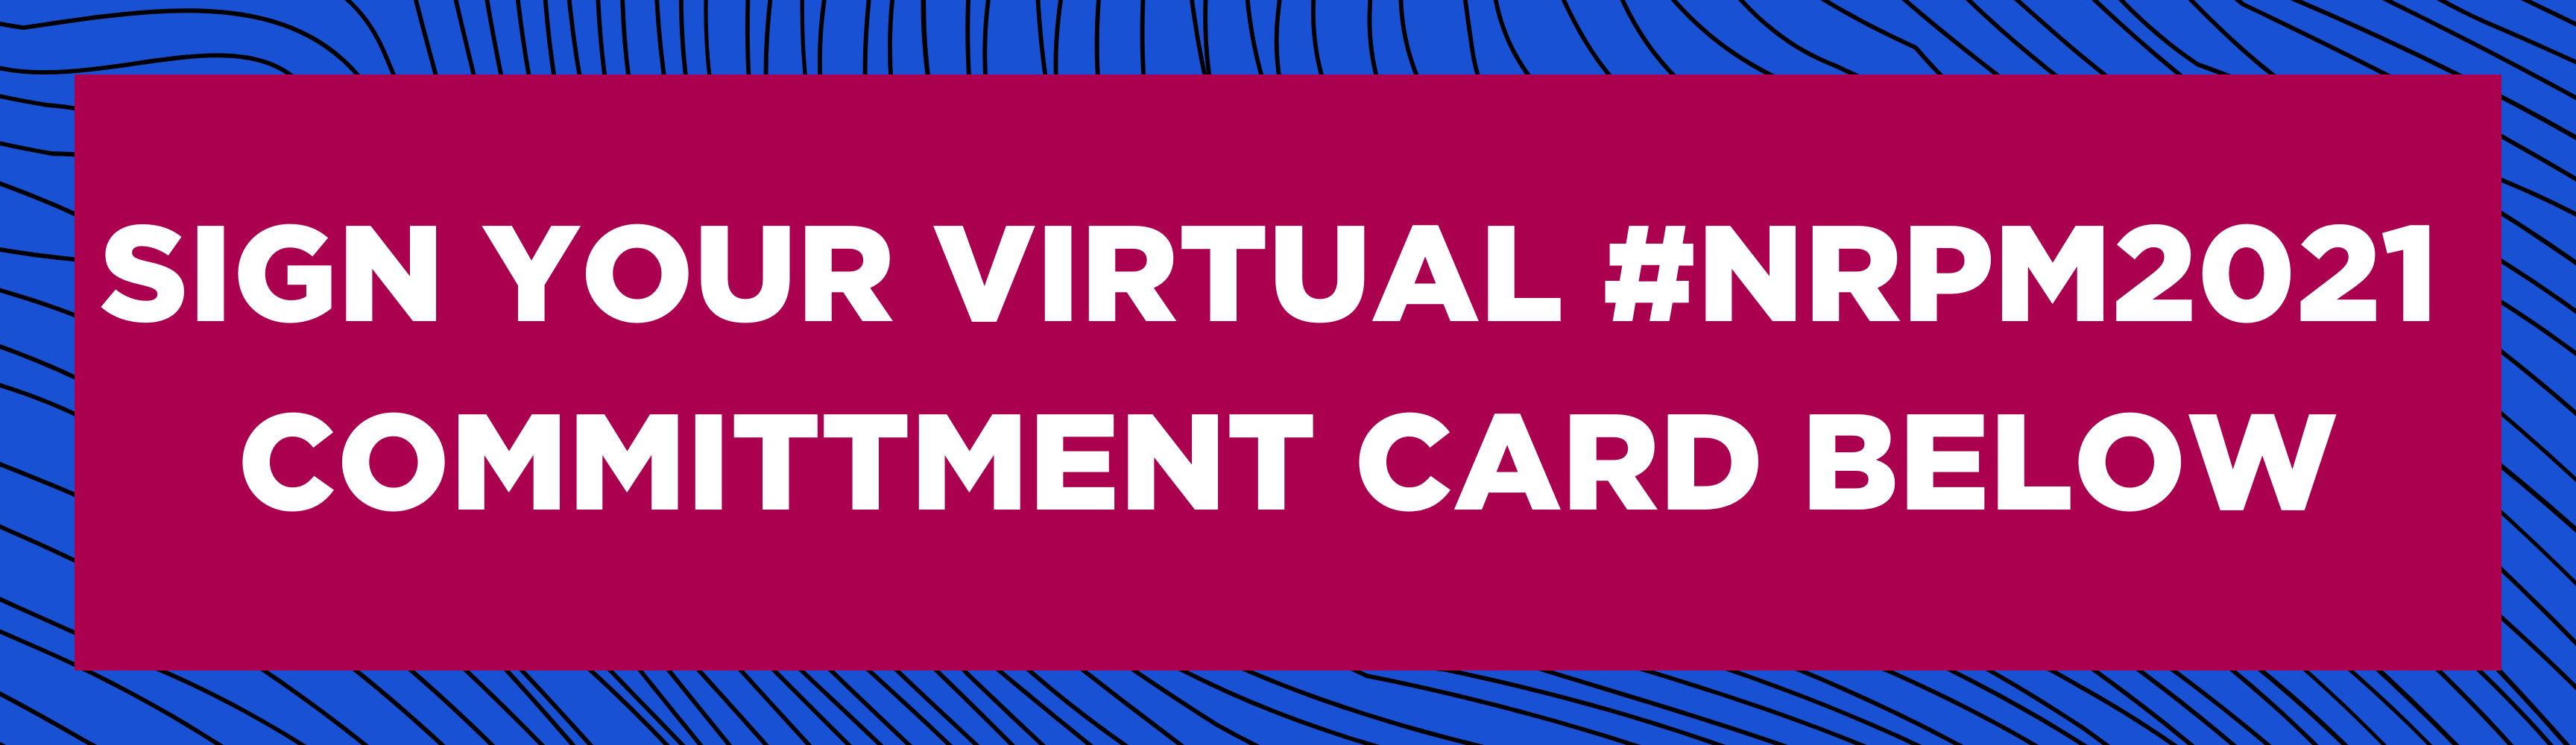 SIGN YOUR VIRTUAL NRPM2021 COMMITTMENT CARD